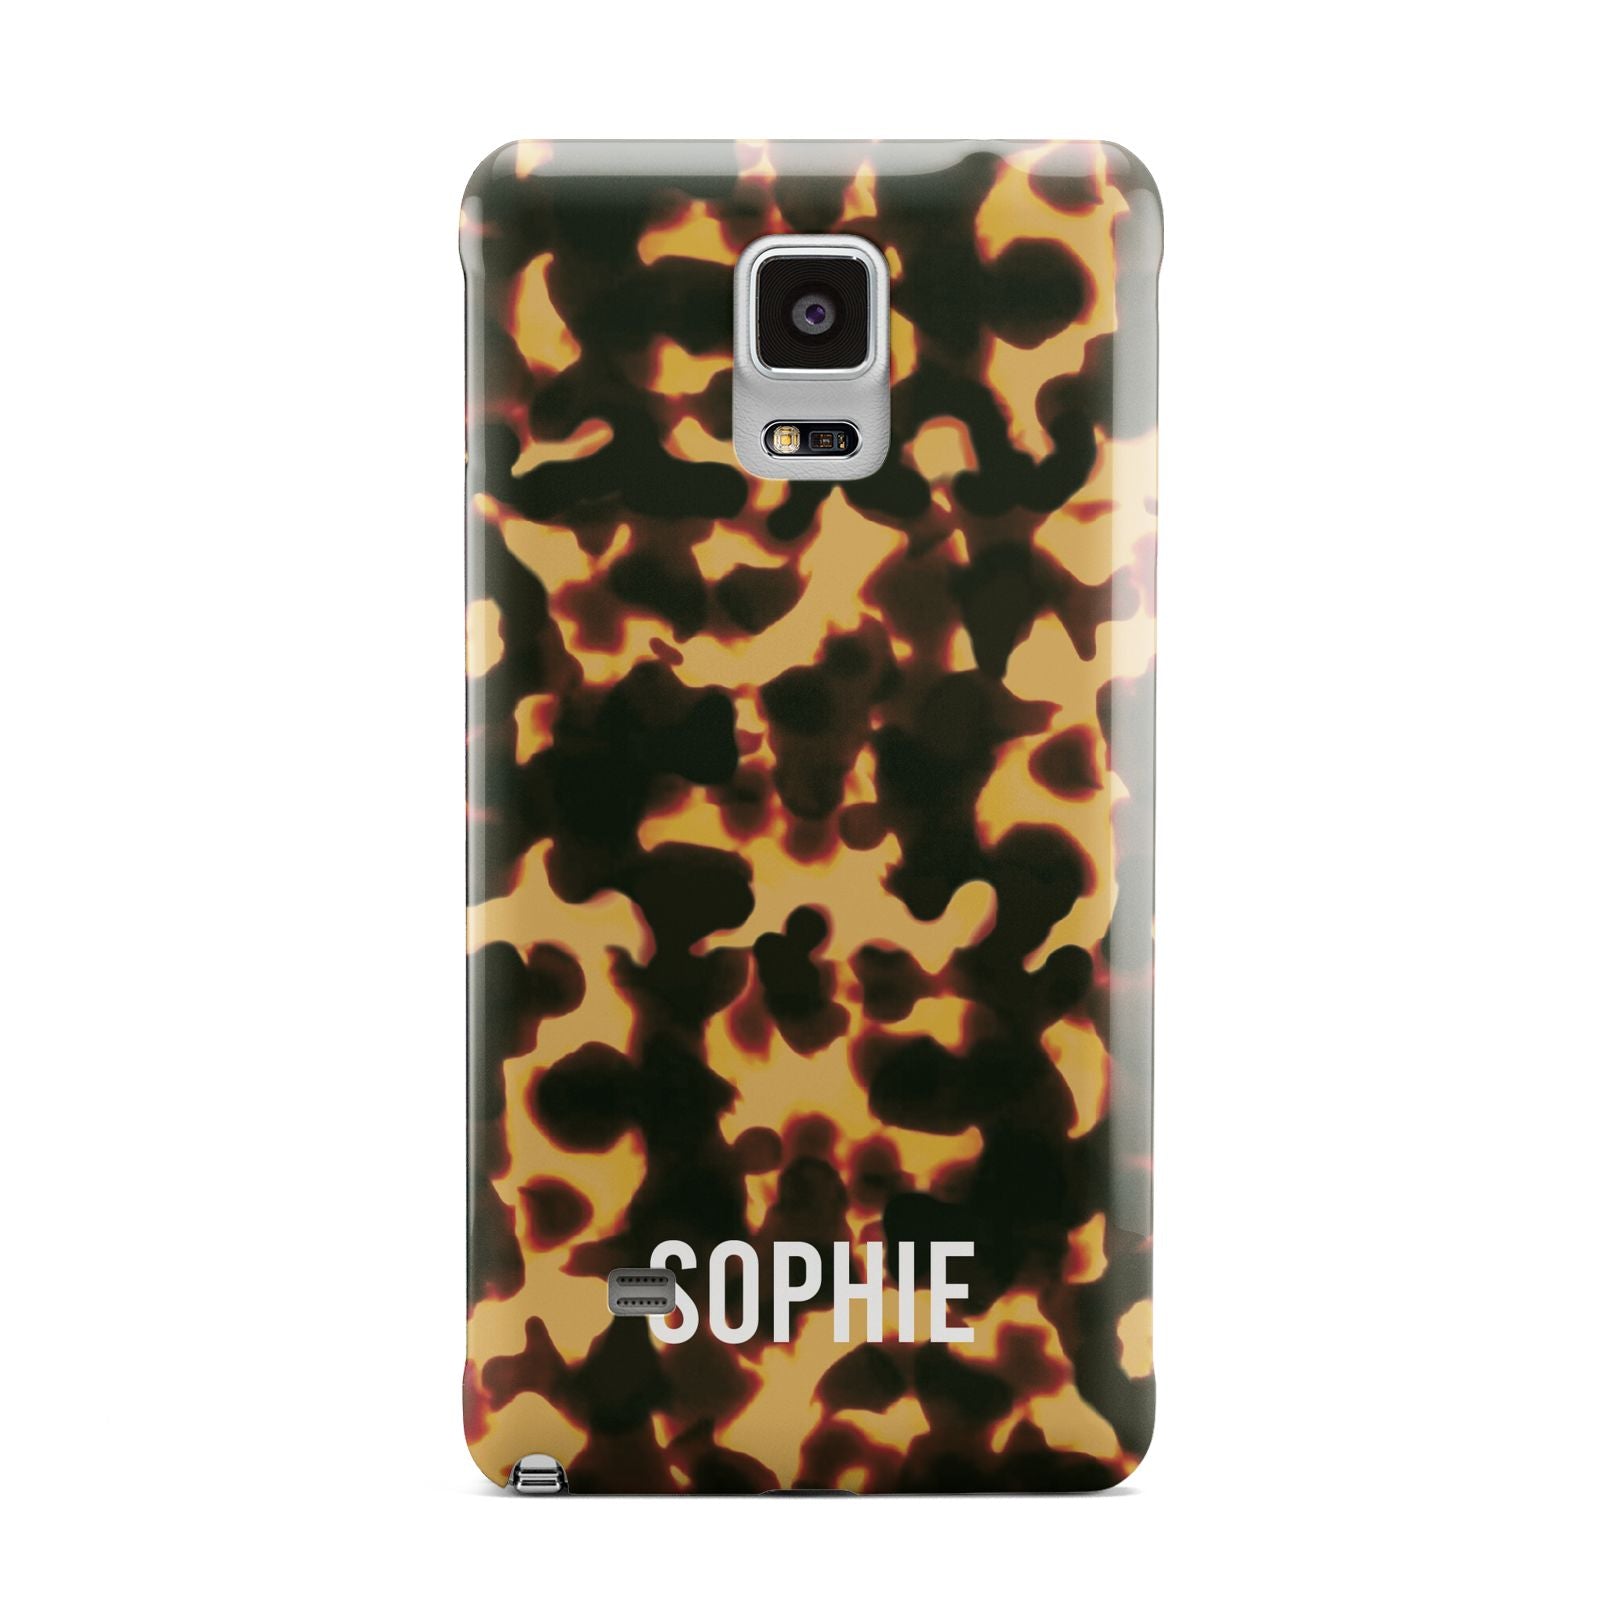 Personalised Tortoise Shell Pattern Samsung Galaxy Note 4 Case